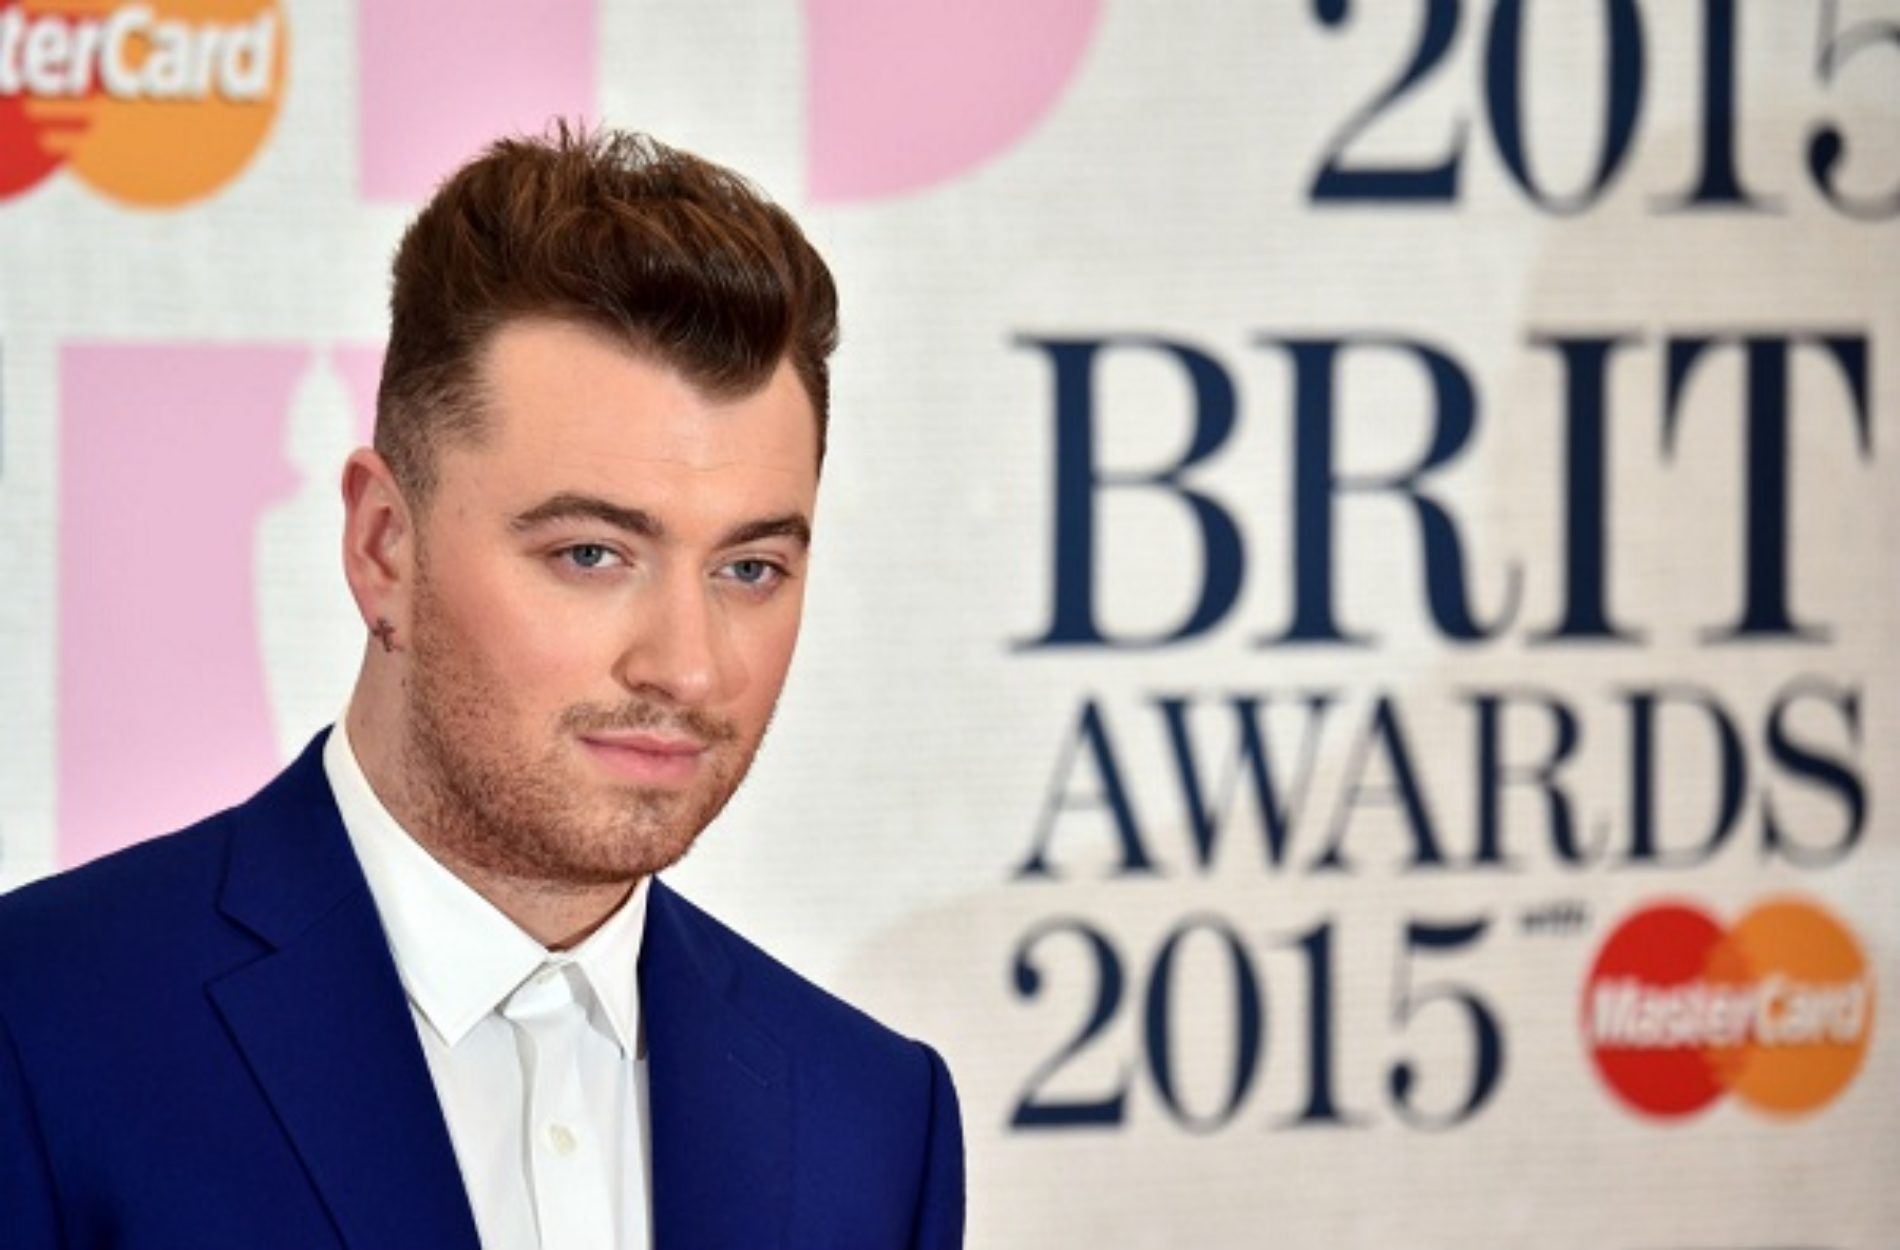 Sam Smith on his songs changing opinions in homophobic countries